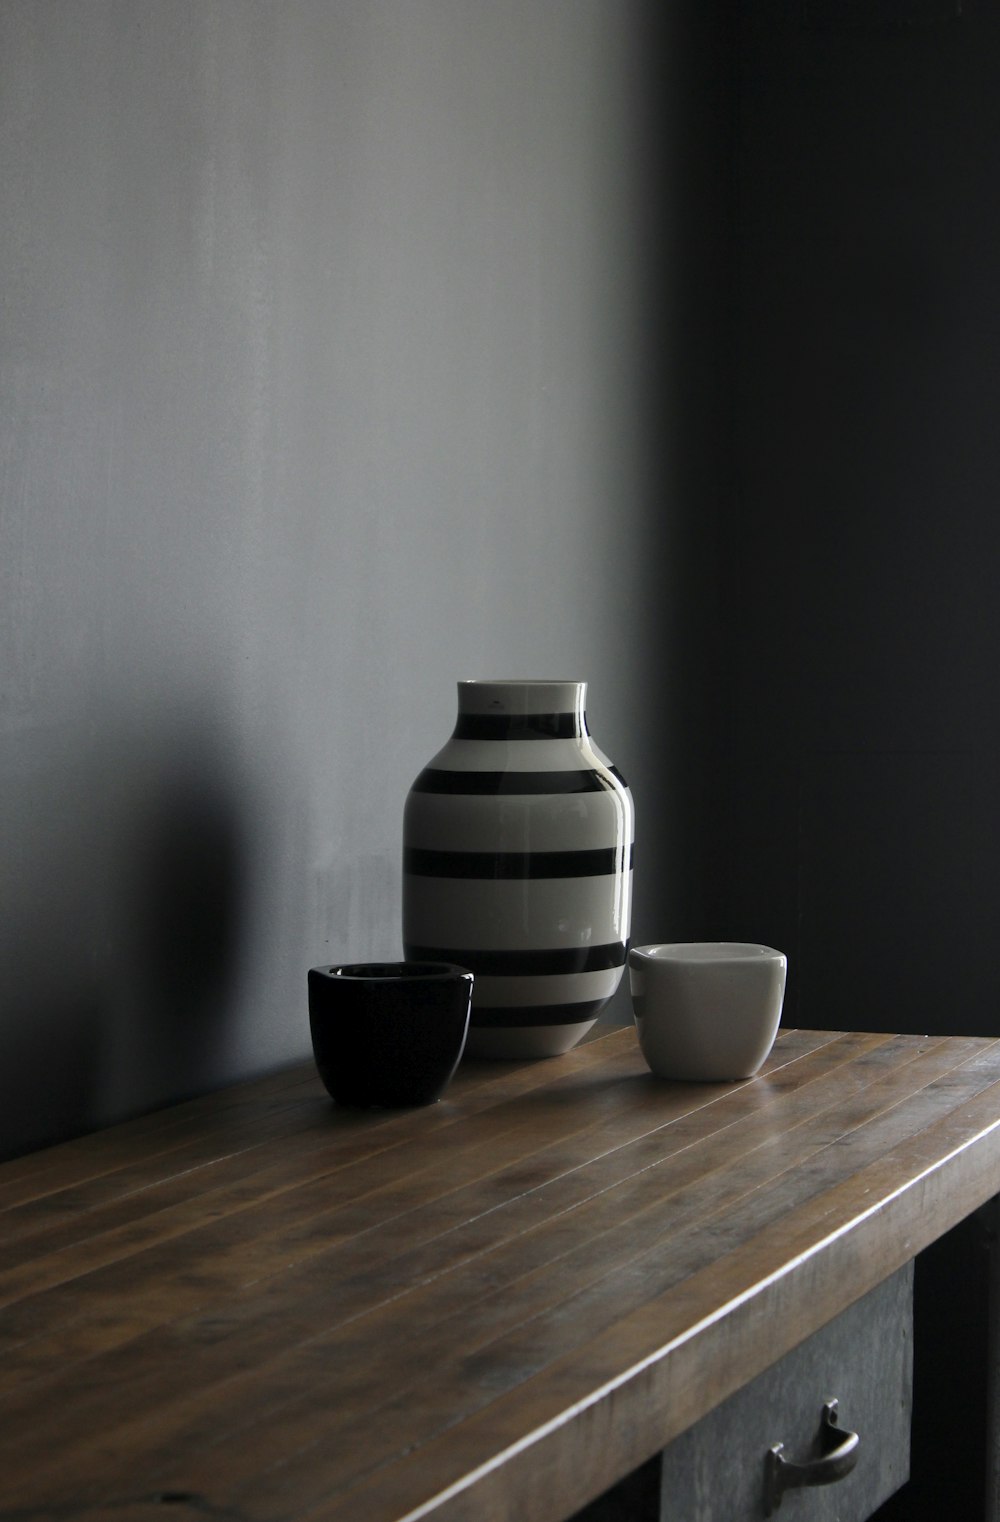 white and black striped ceramic vase on brown wooden table